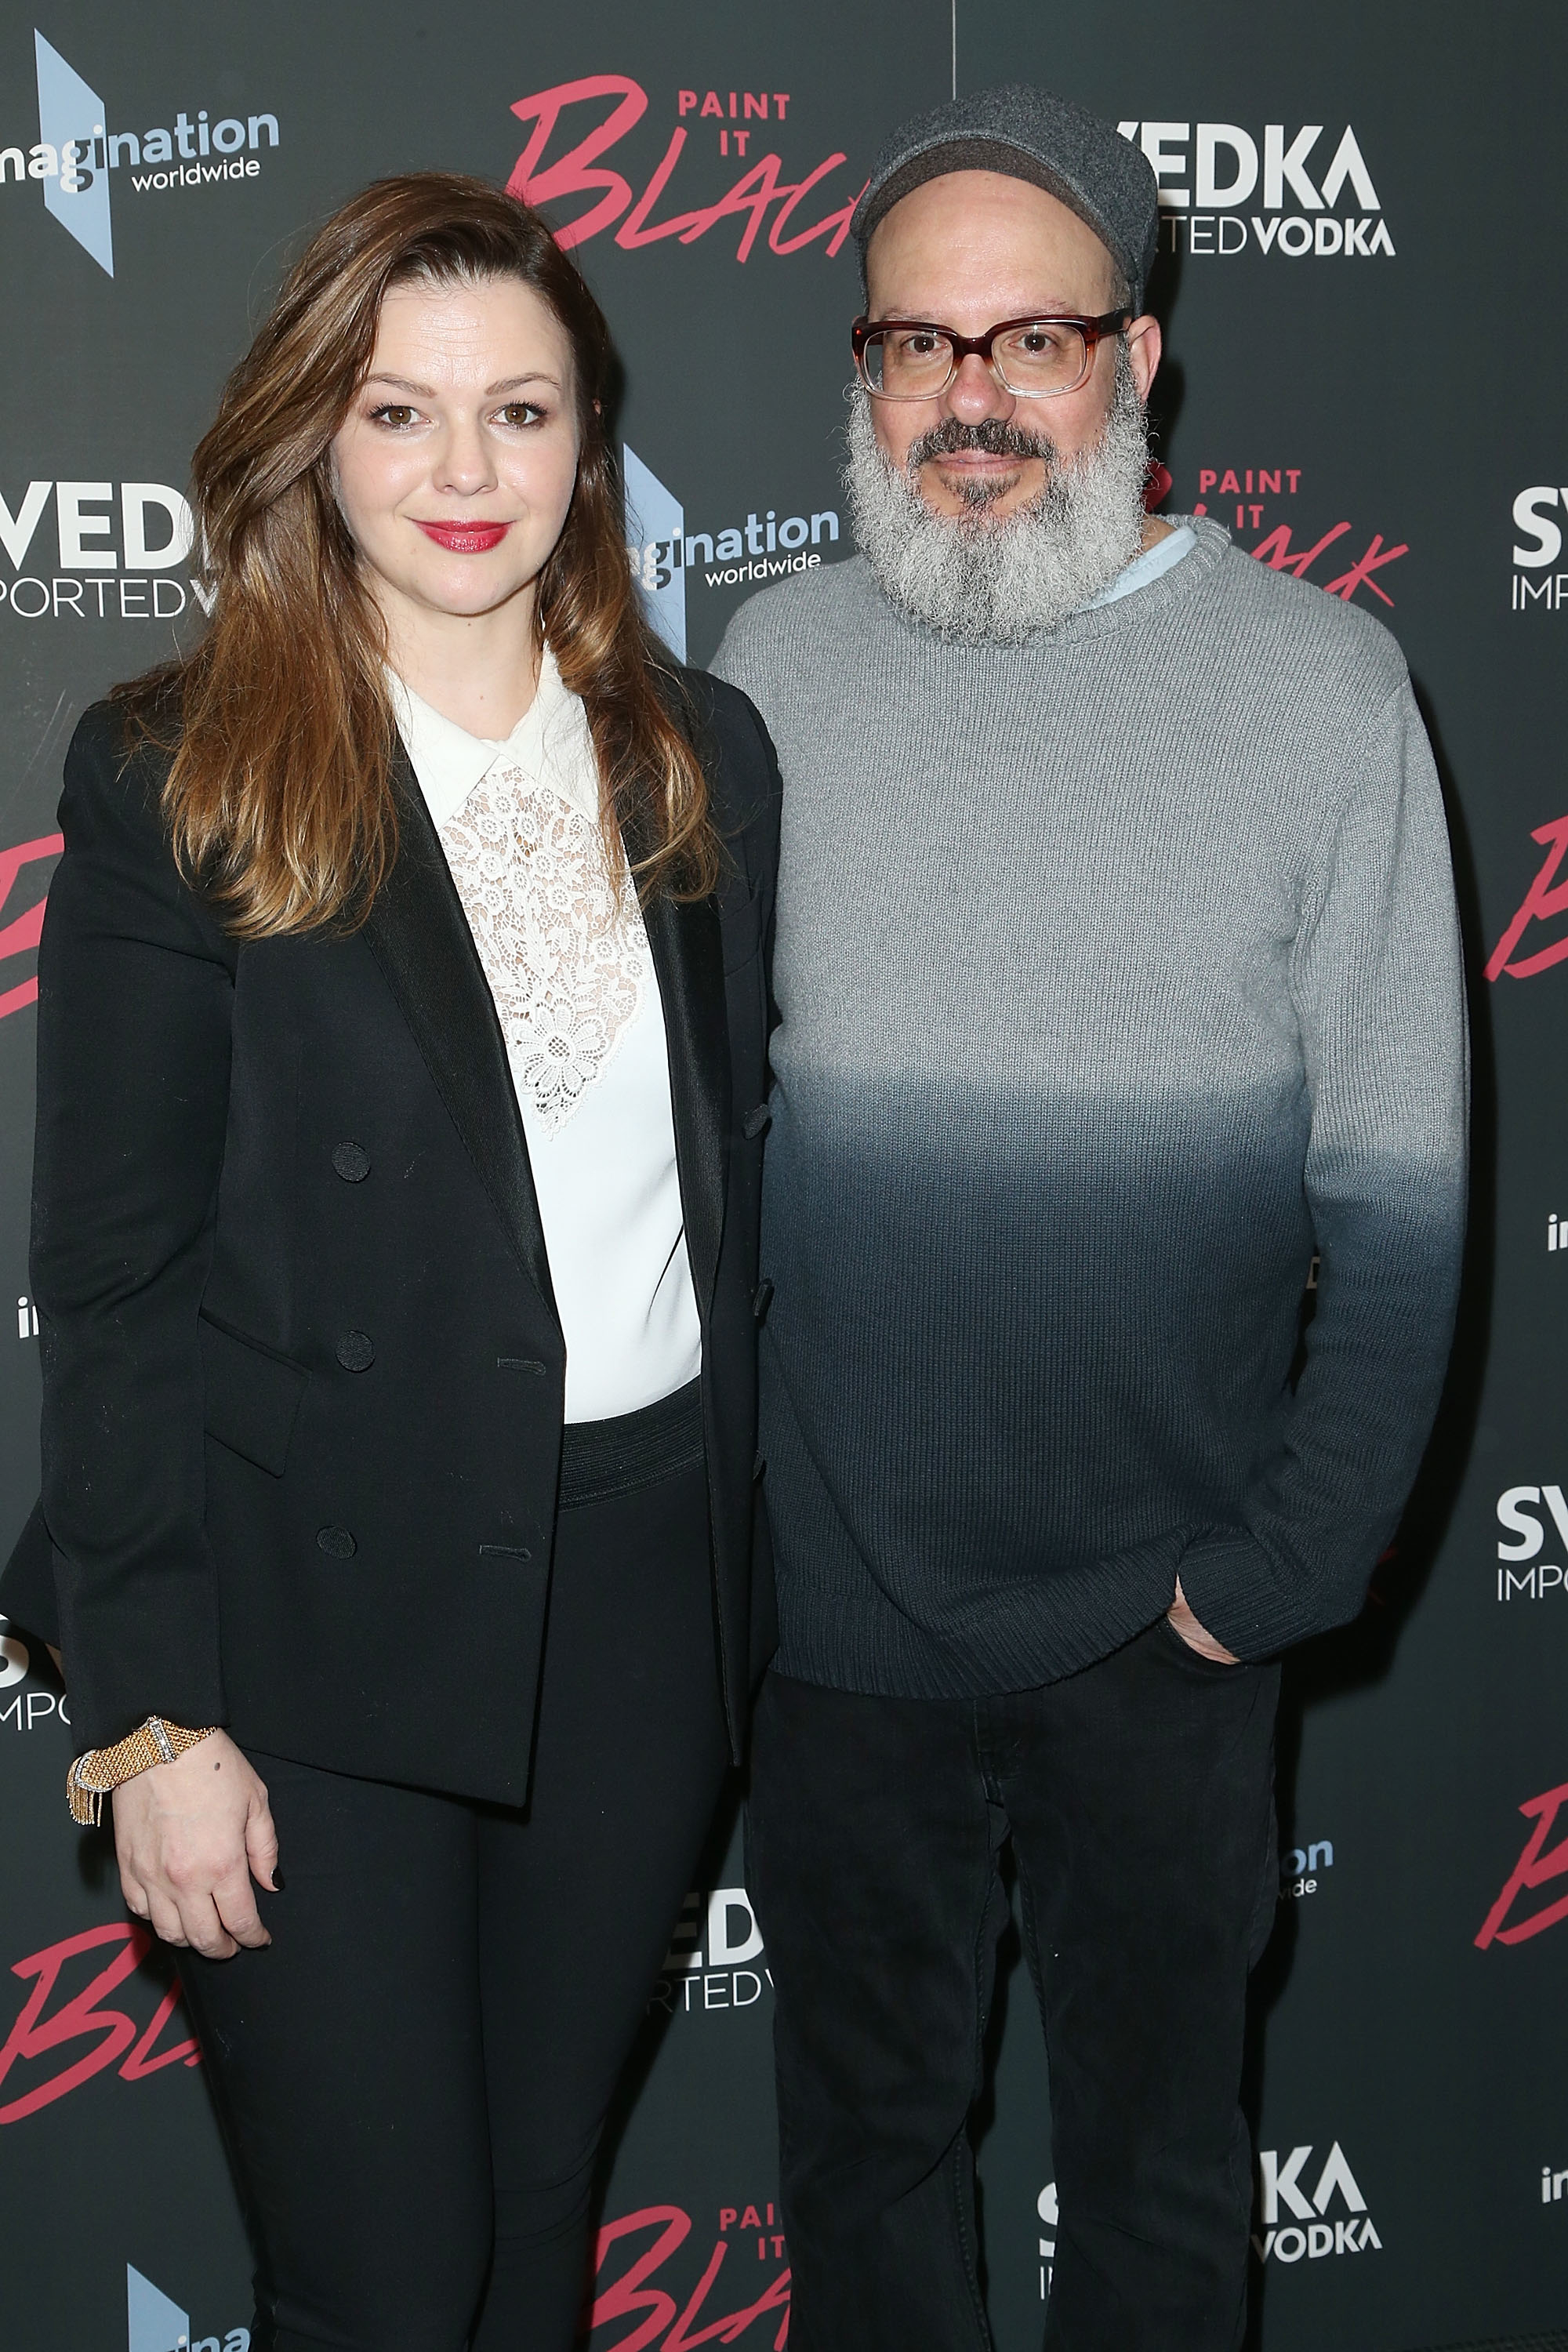 Two individuals posing together; one in a black blazer and white top, the other in a gray sweater. They are at an event with a branded backdrop